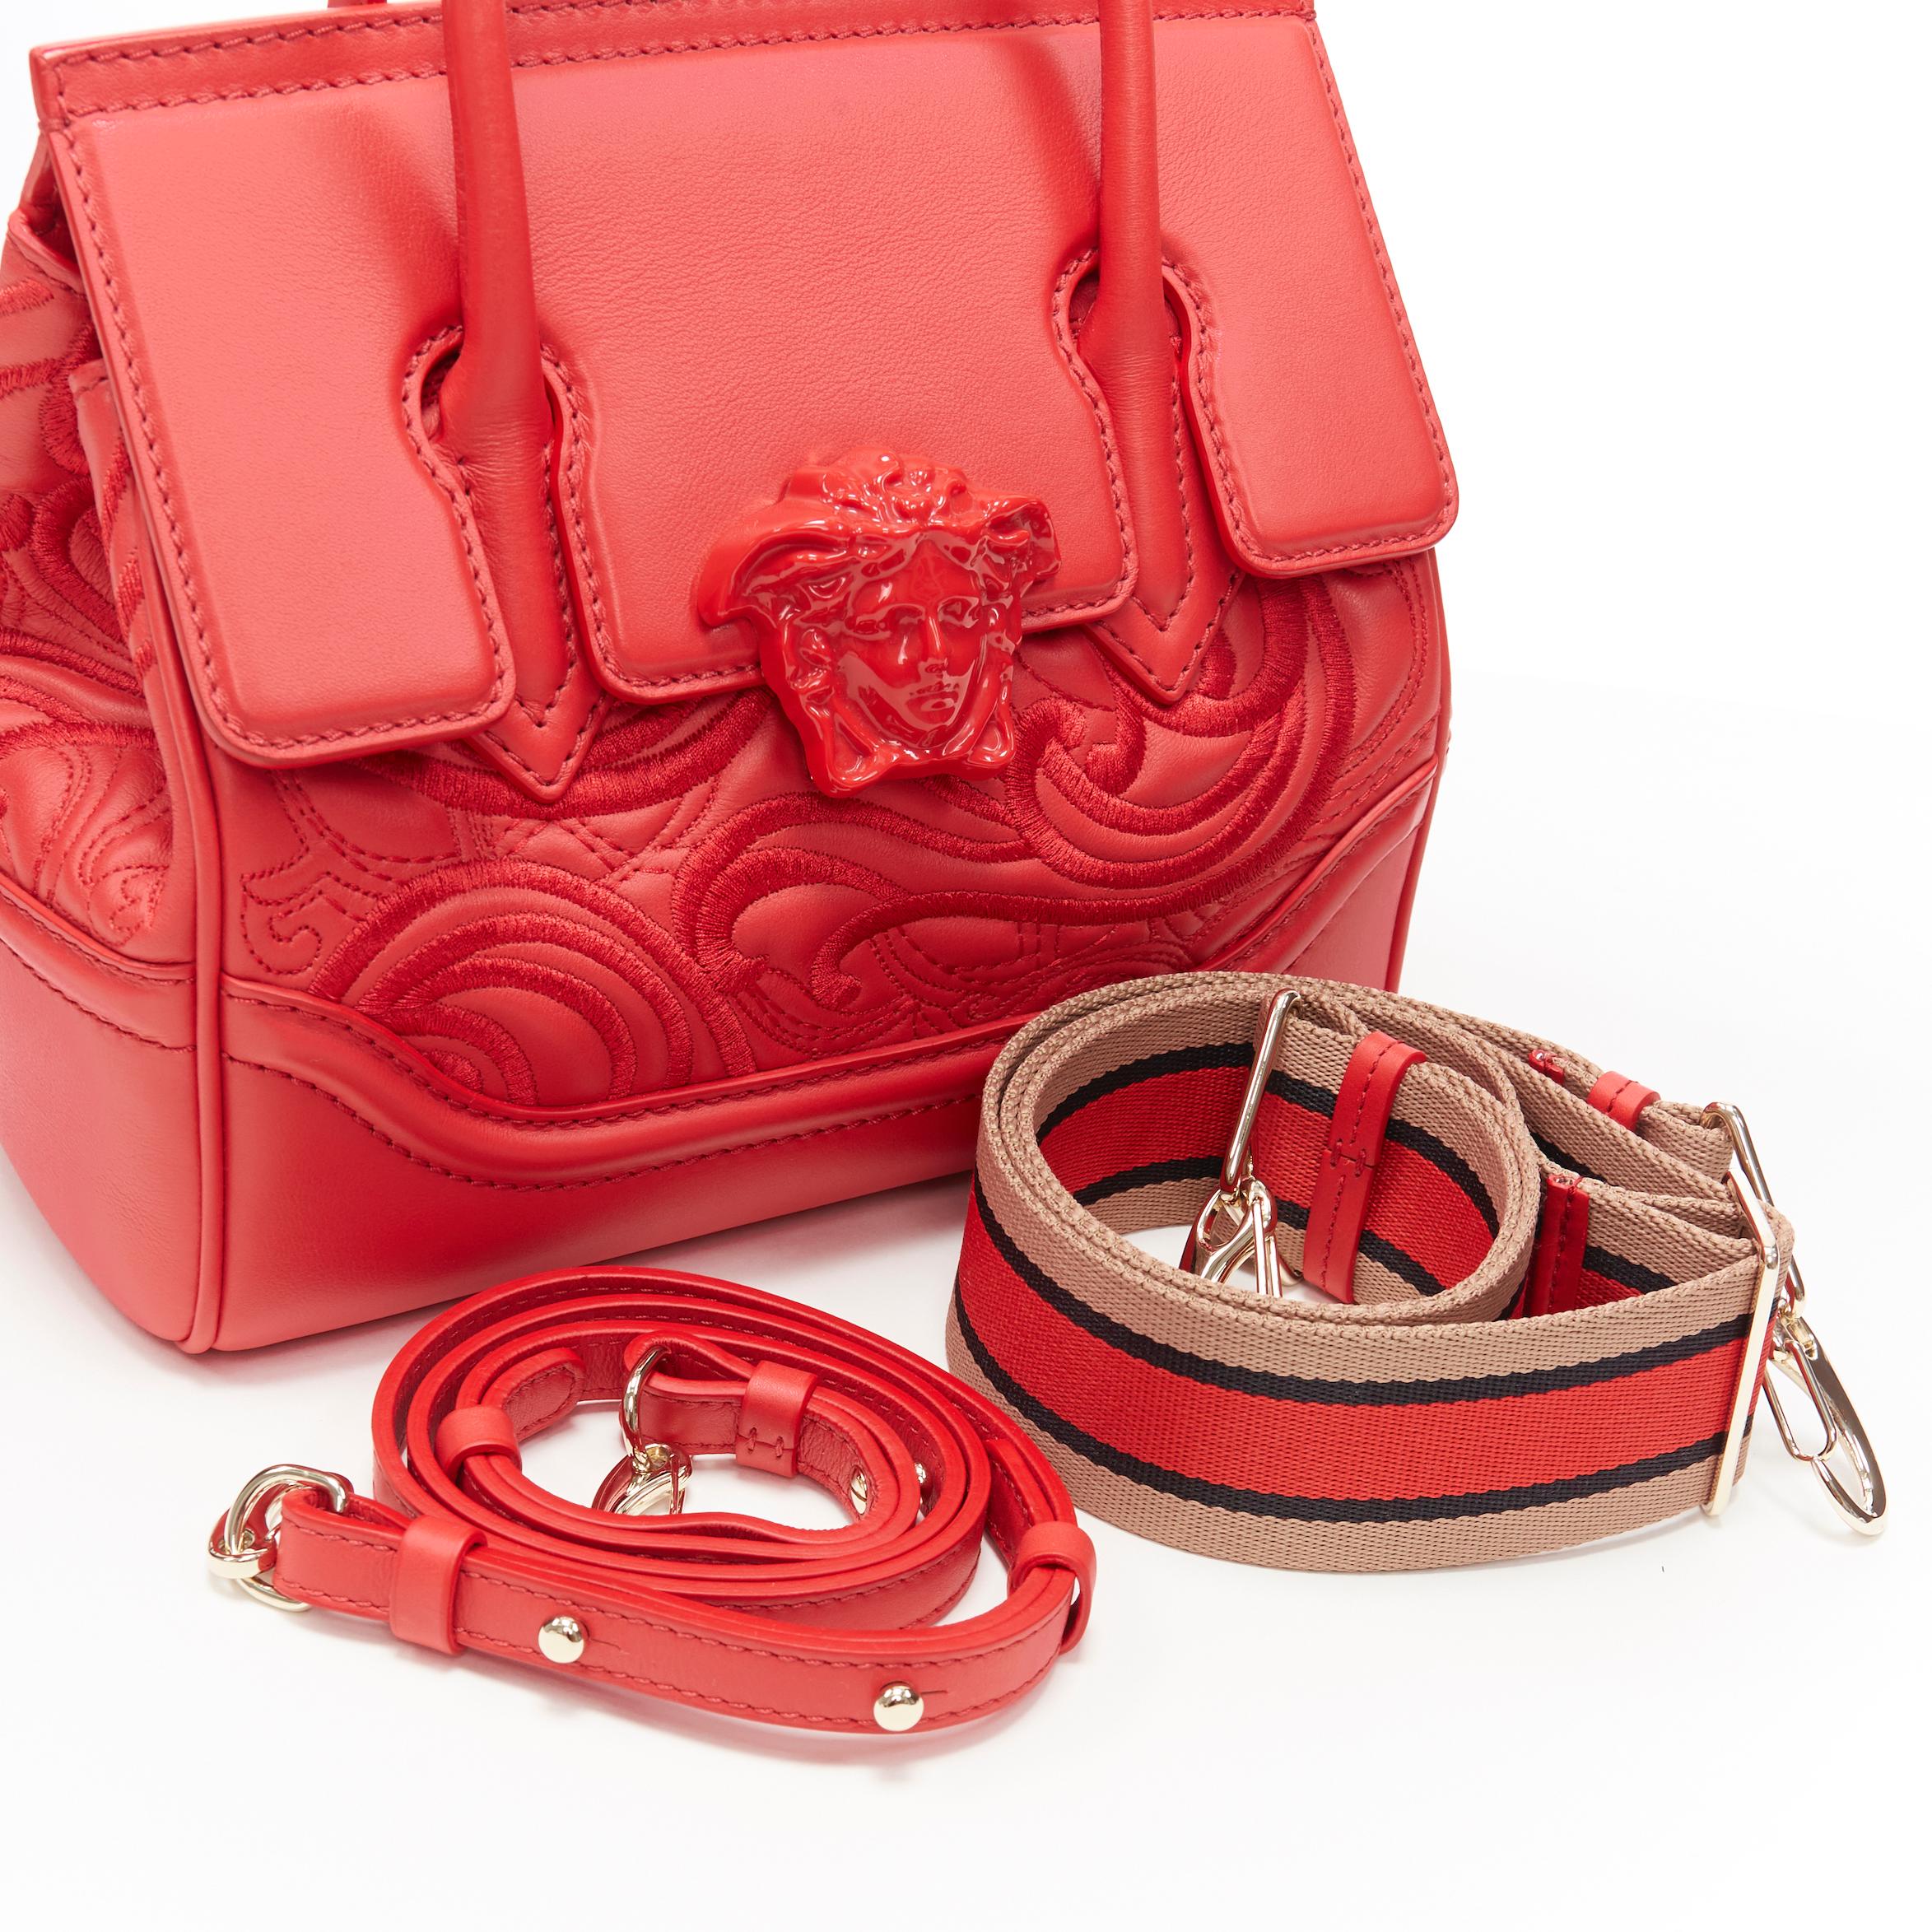 new VERSACE Palazzo Empire Small Baroque Embroidered red Medusa satchel bag 4